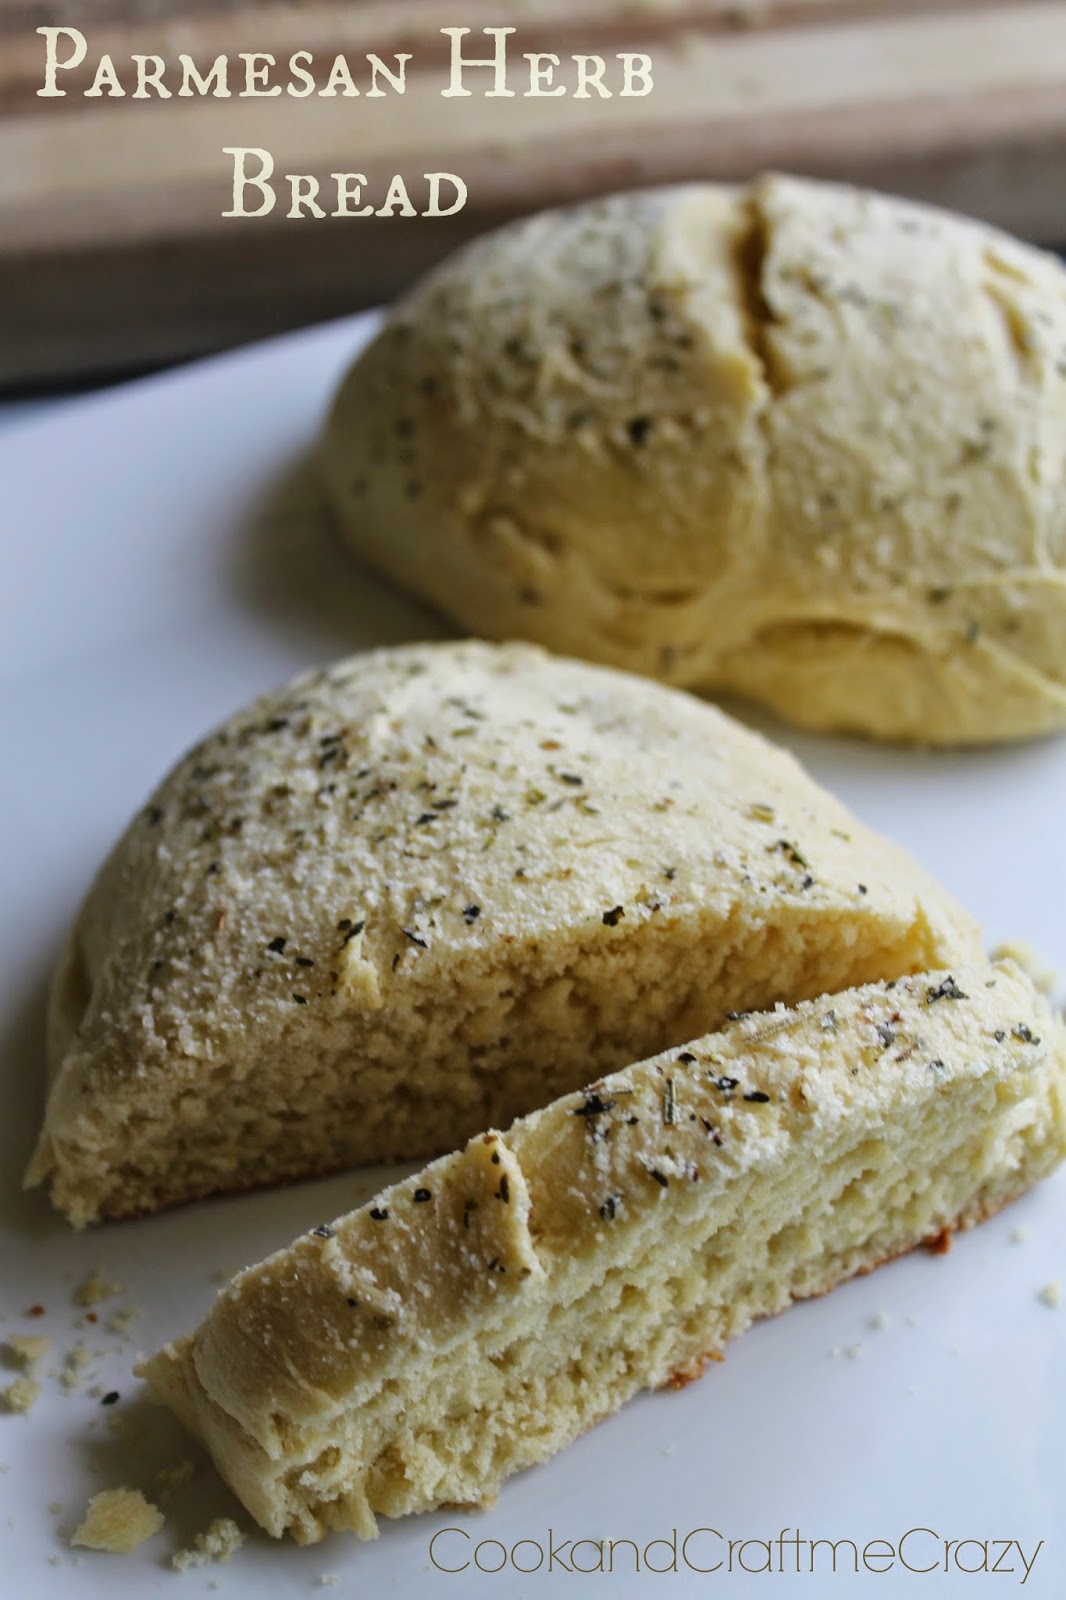 Cook and Craft Me Crazy: Parmesan Herb Bread